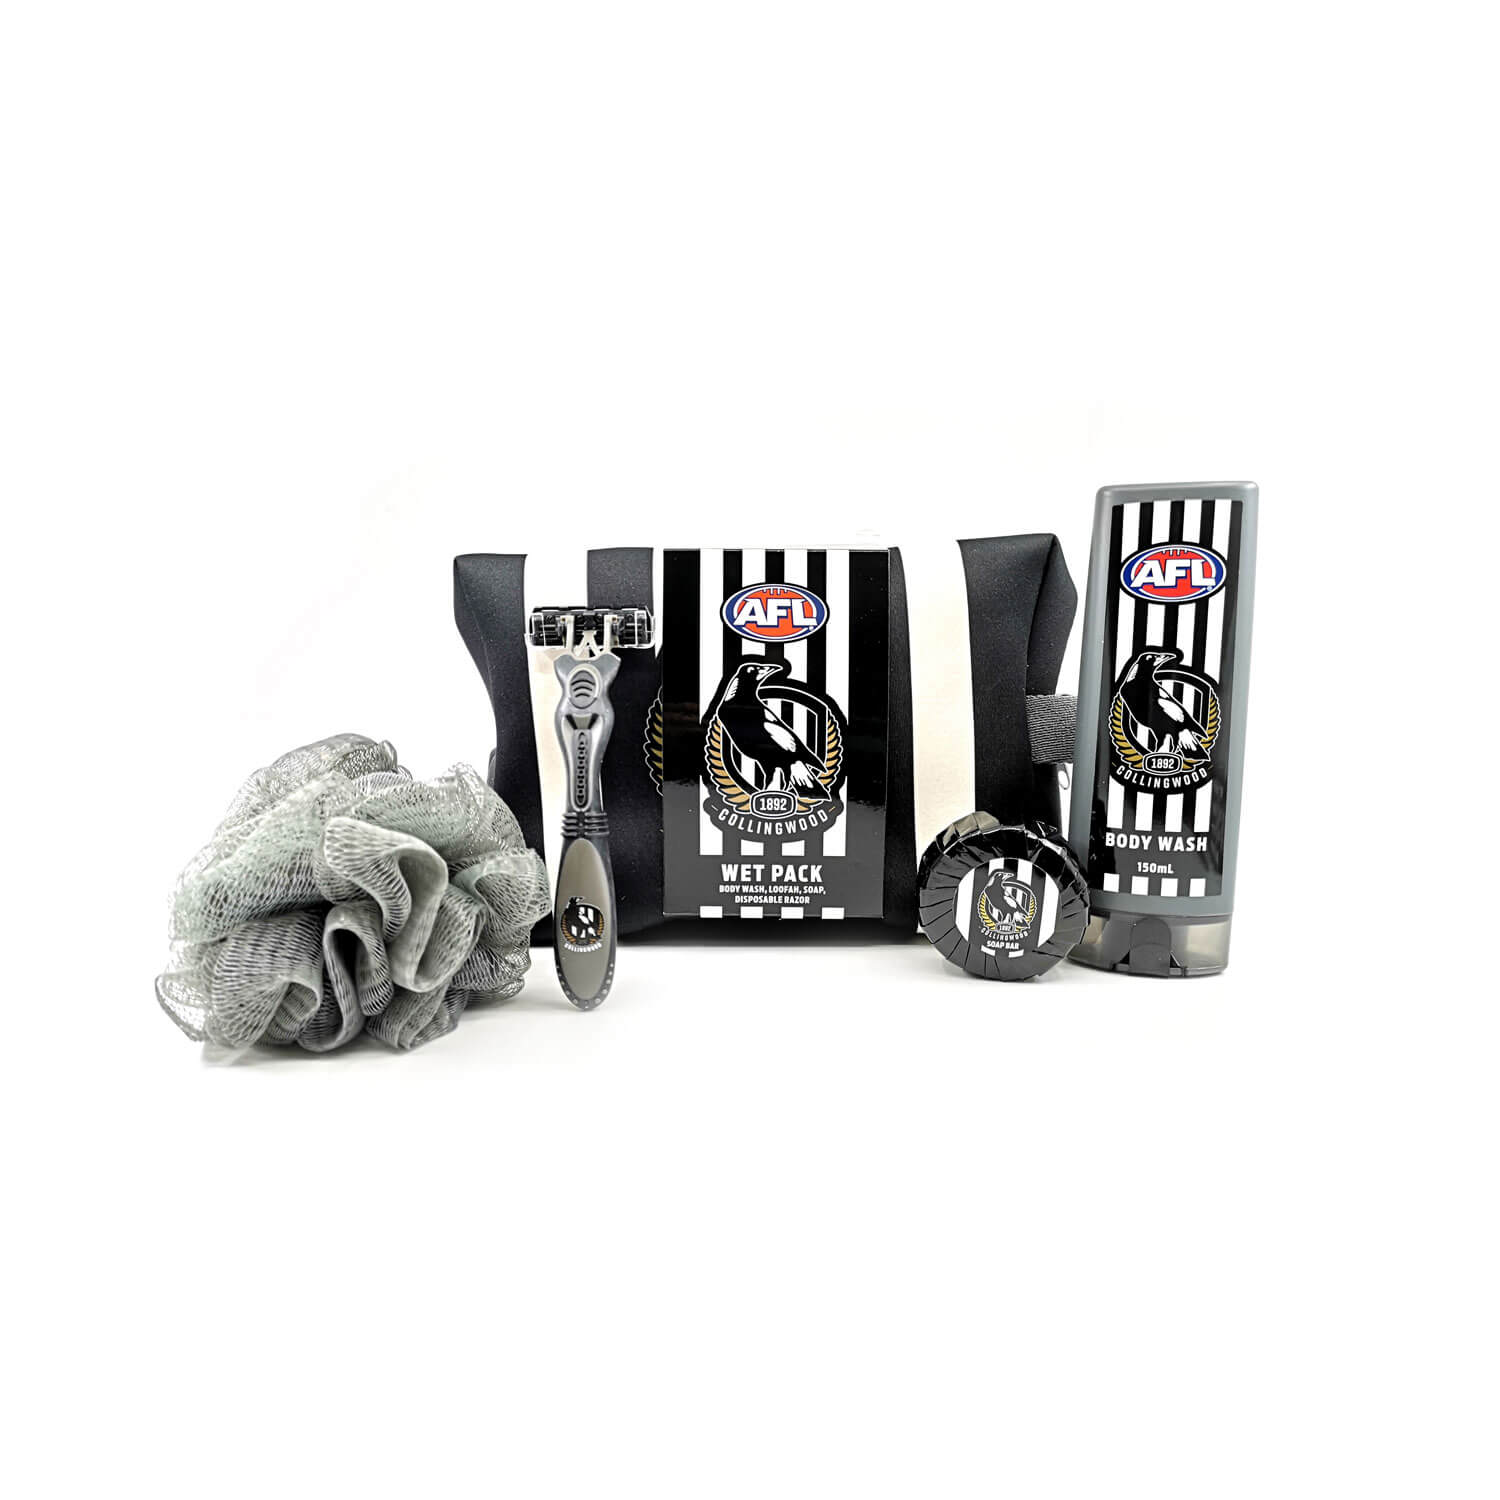 Collingwood Magpies AFL Toiletry Set!